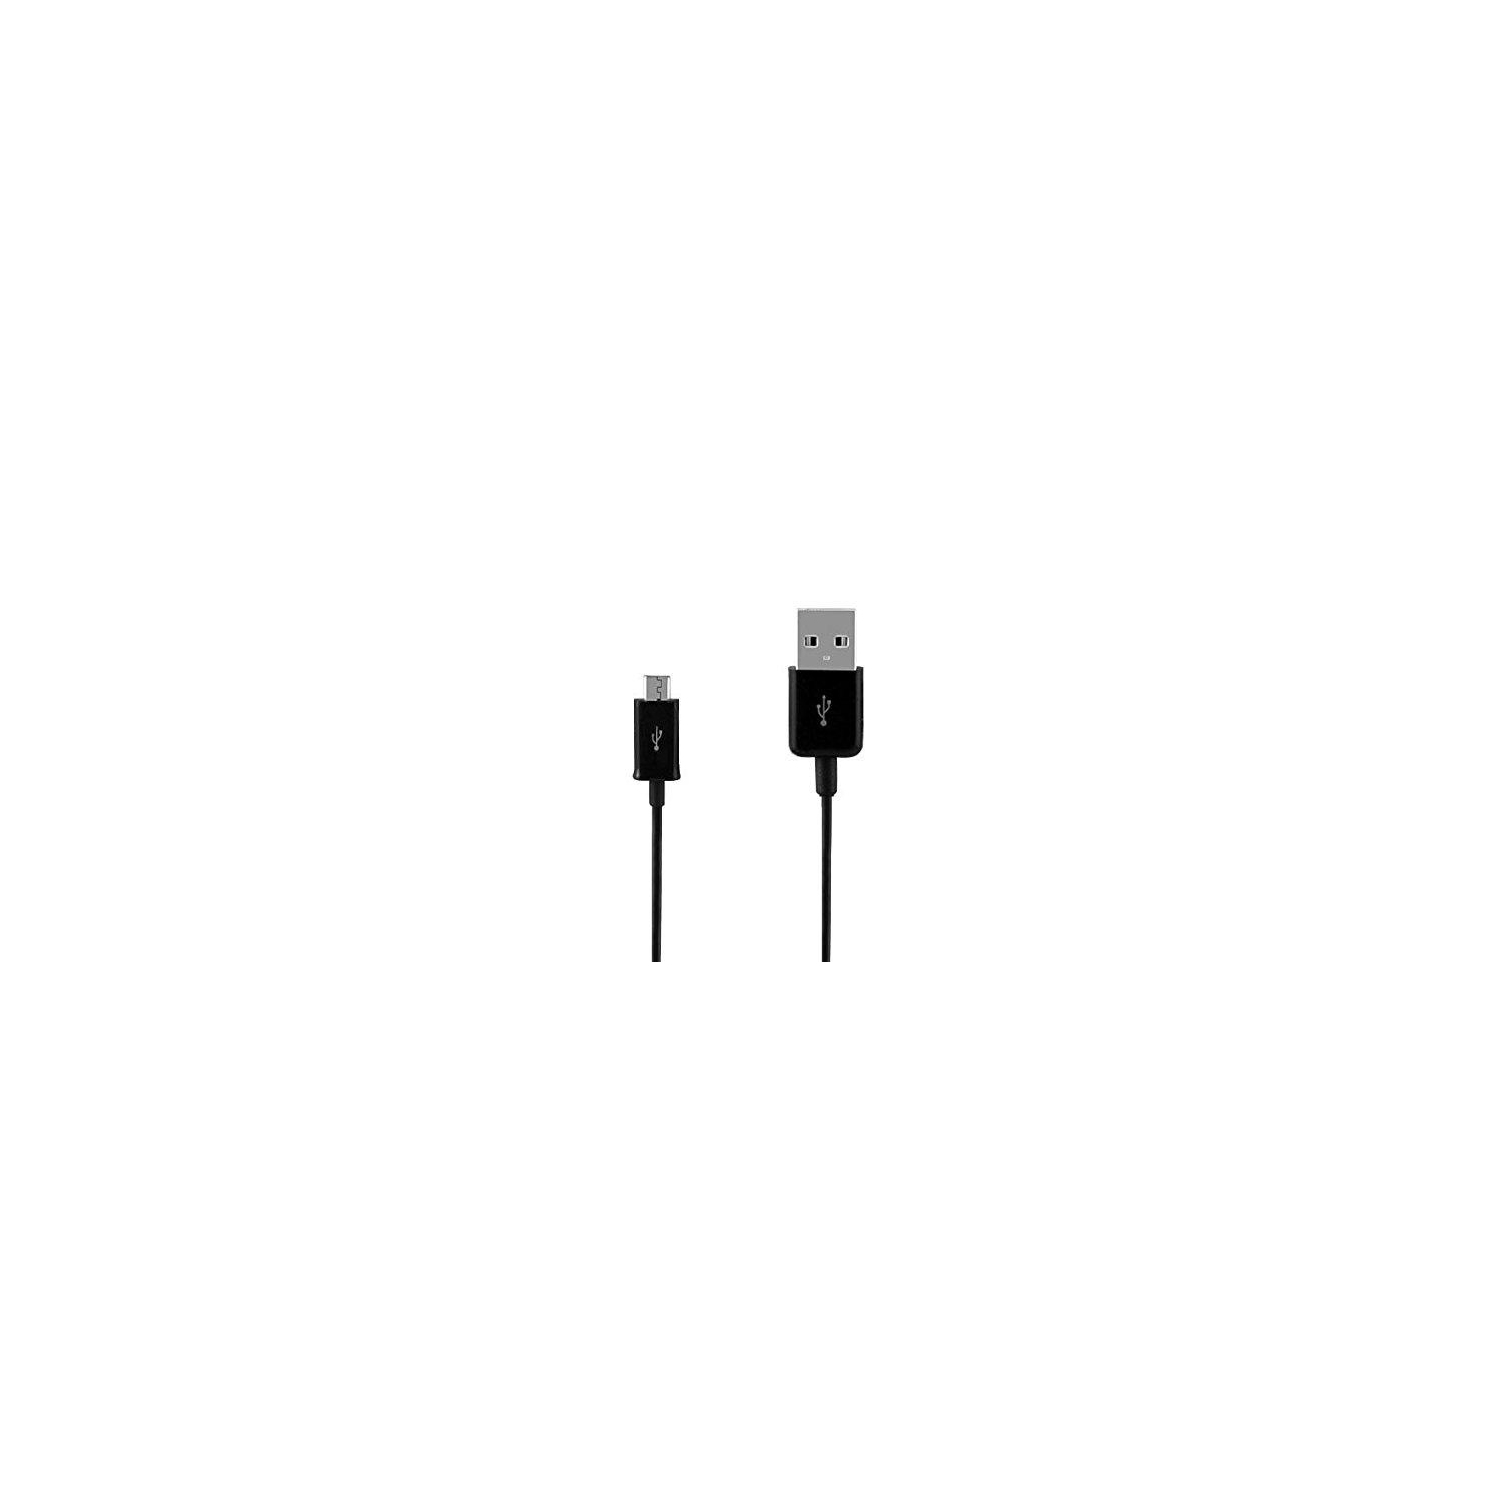 Samsung 5Ft/1.5M Micro USB Fast Charging Data Sync Cable for Samsung Galaxy S3 S4 / S6 Edge Plus / Note 4, Black